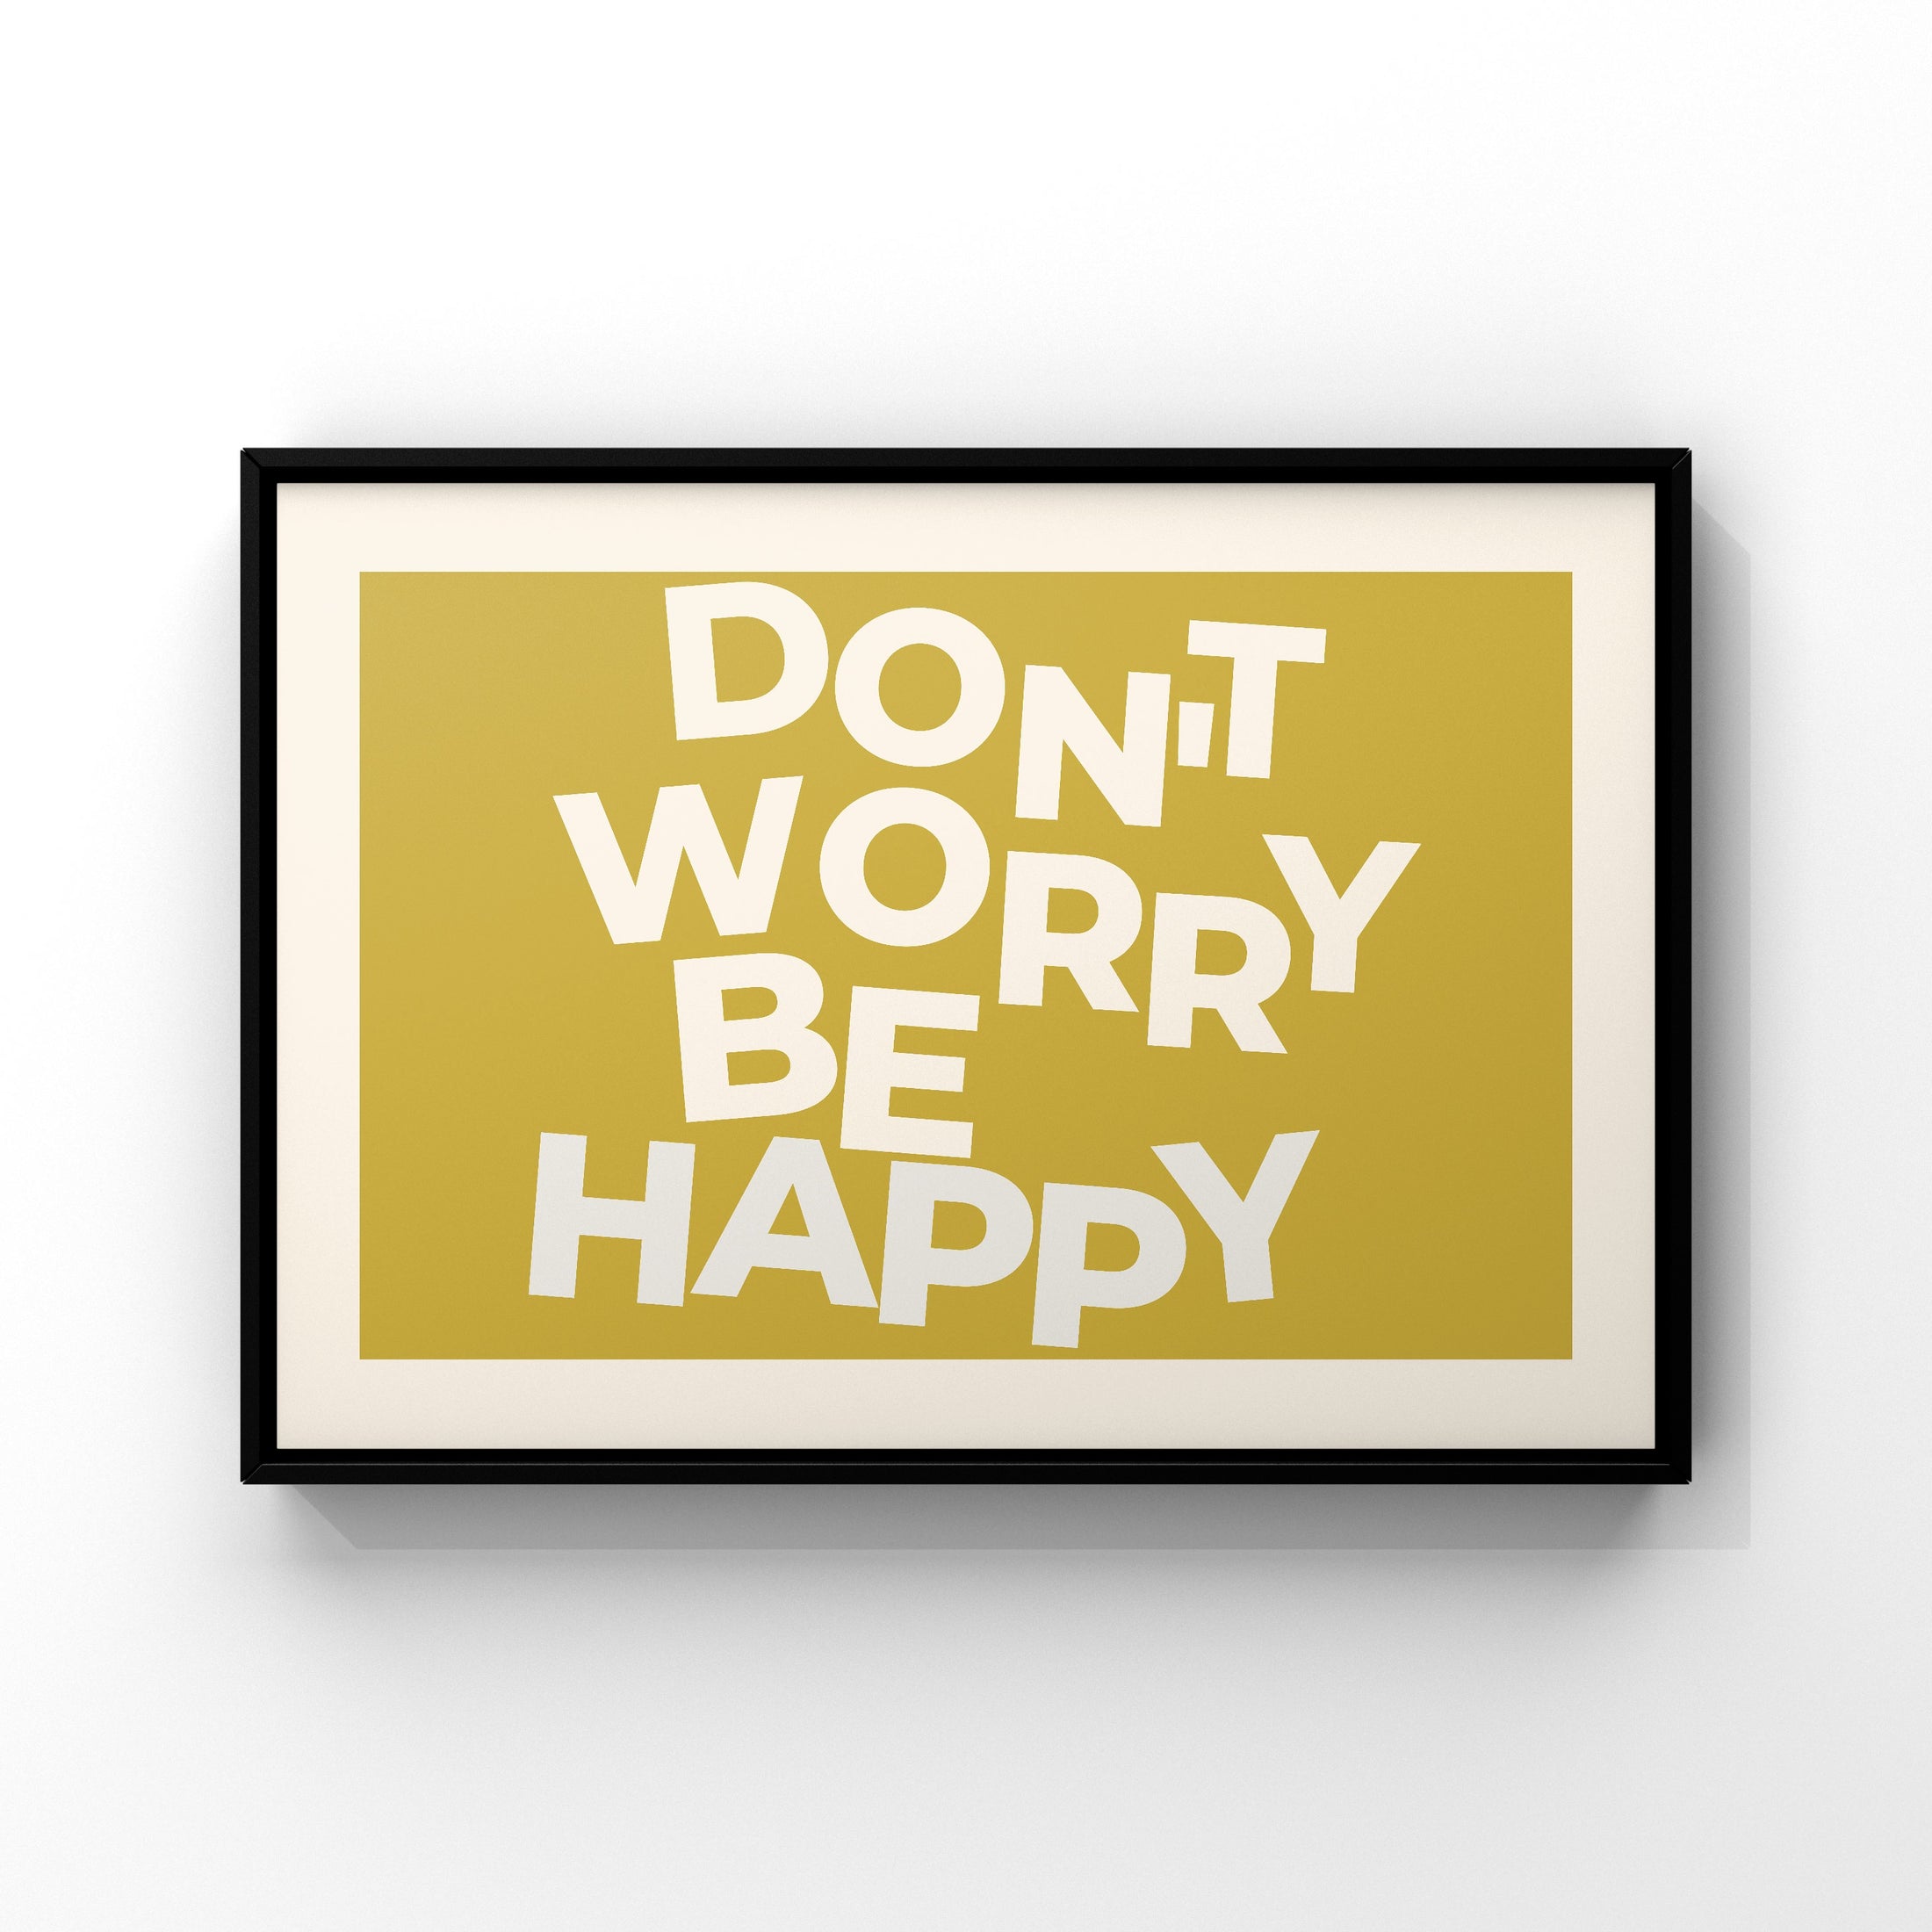 Don’t worry